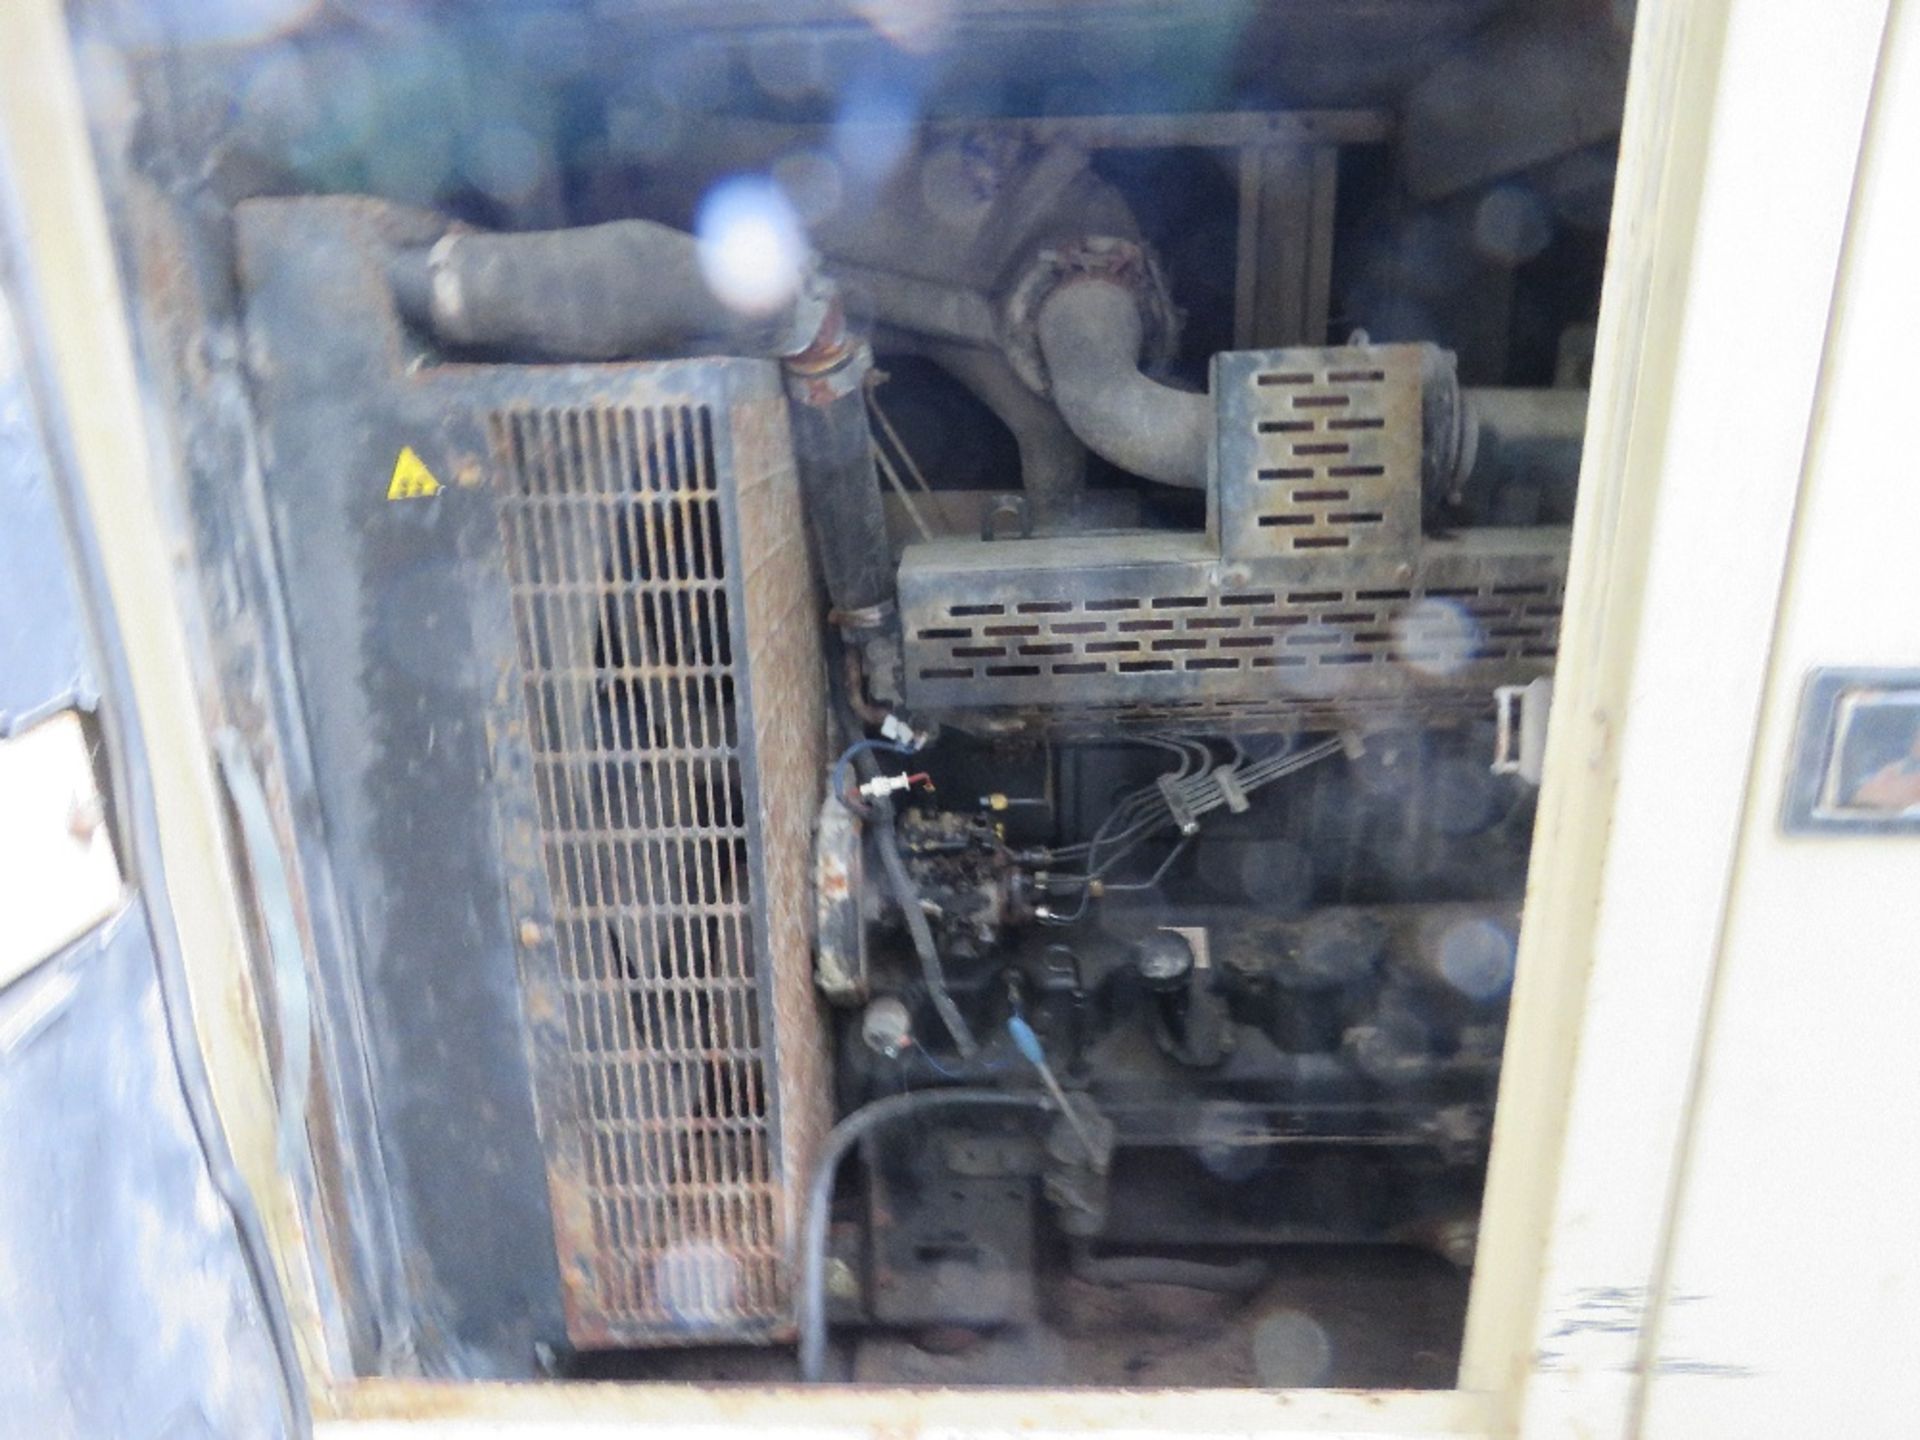 INGERSOLL RAND G200 SKID MOUNTED 200KVA RATED GENERATOR SET WITH JOHN DEERE ENGINE. WHEN TESTED WAS - Image 6 of 9